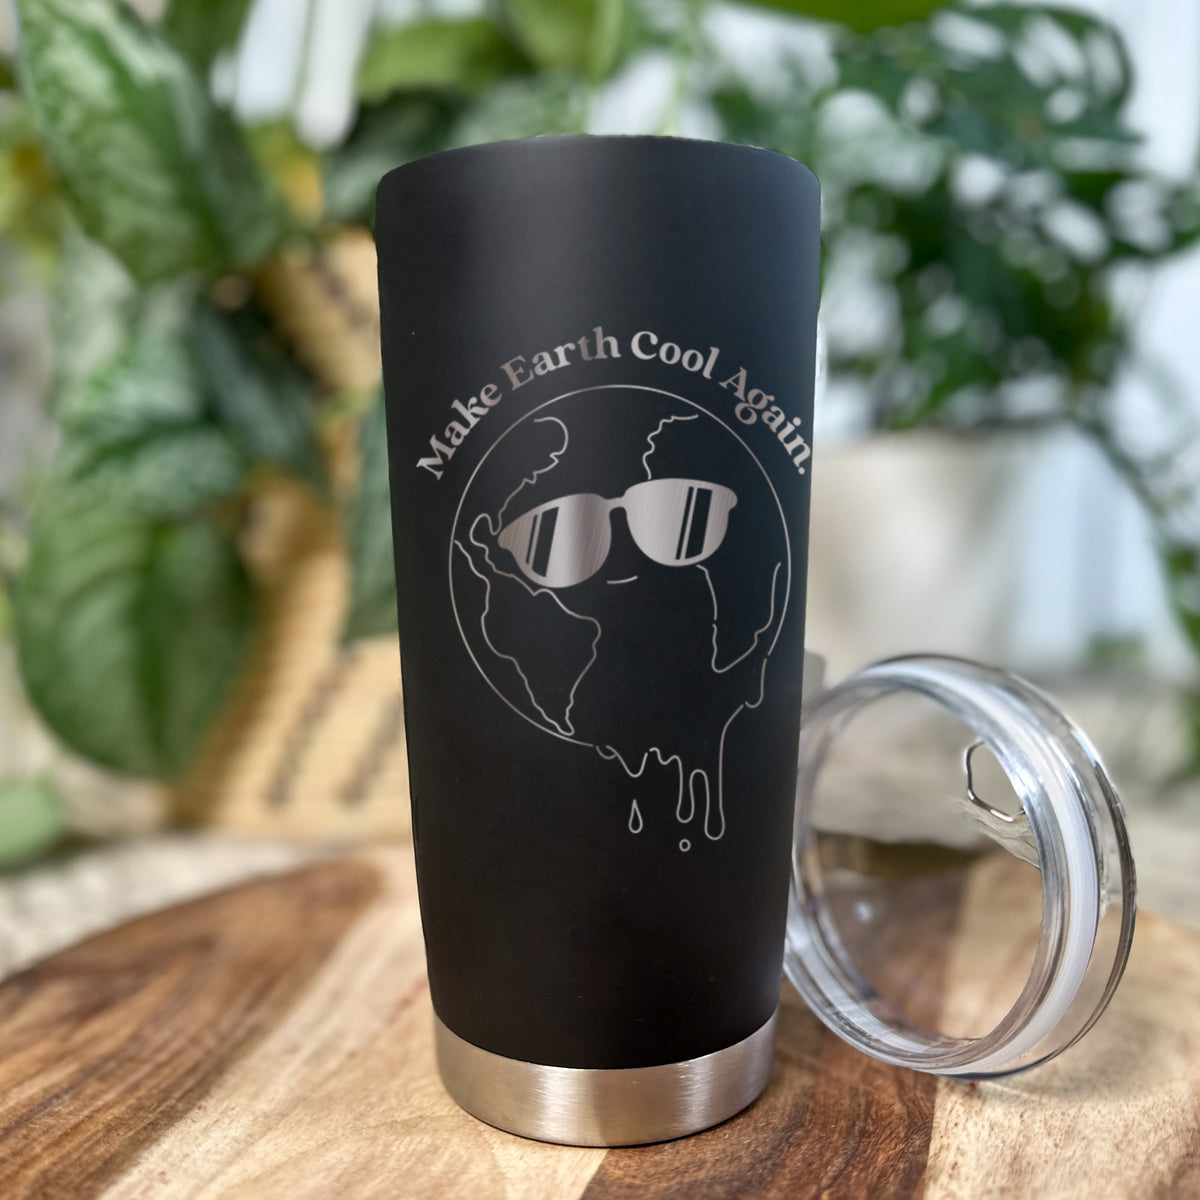 Make Earth Cool Again - Melted Planet - 20oz Polar Insulated Tumbler